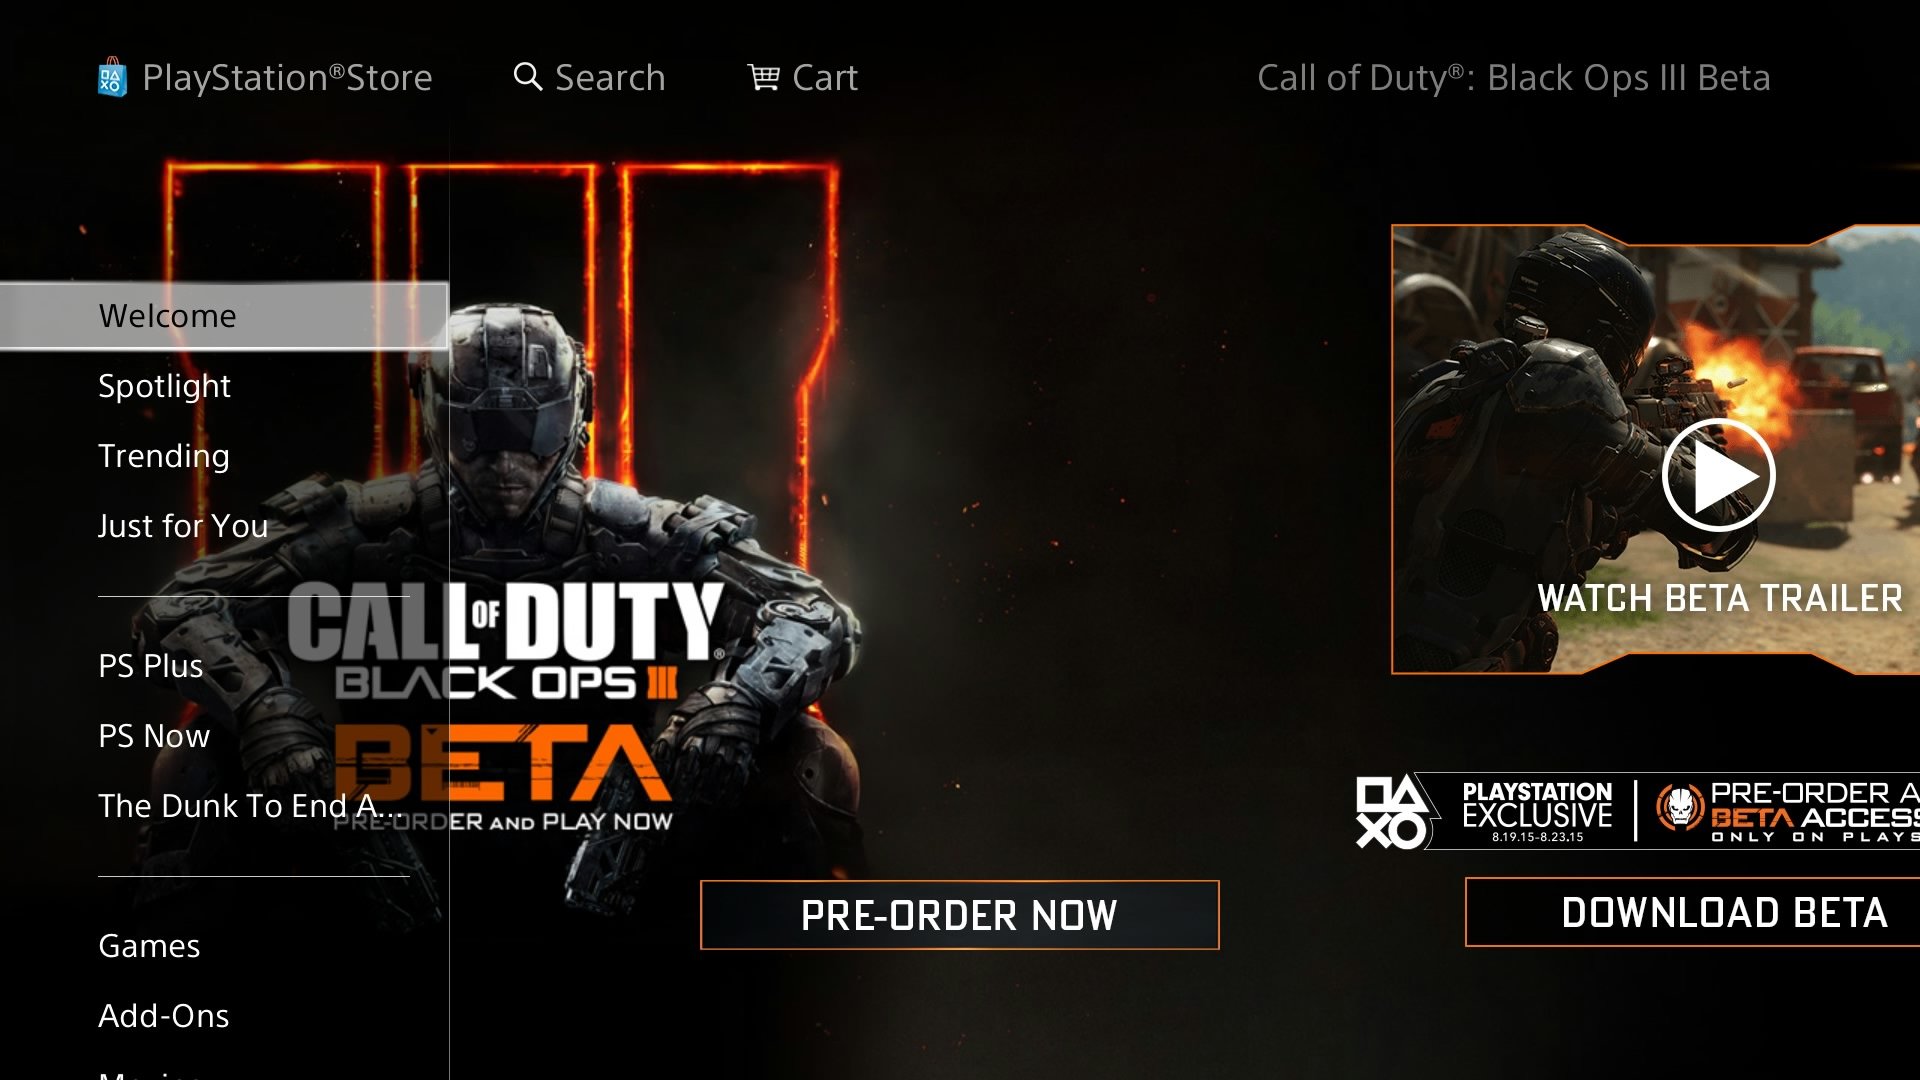 You need your PS4 Black Ops 3 beta token to start.